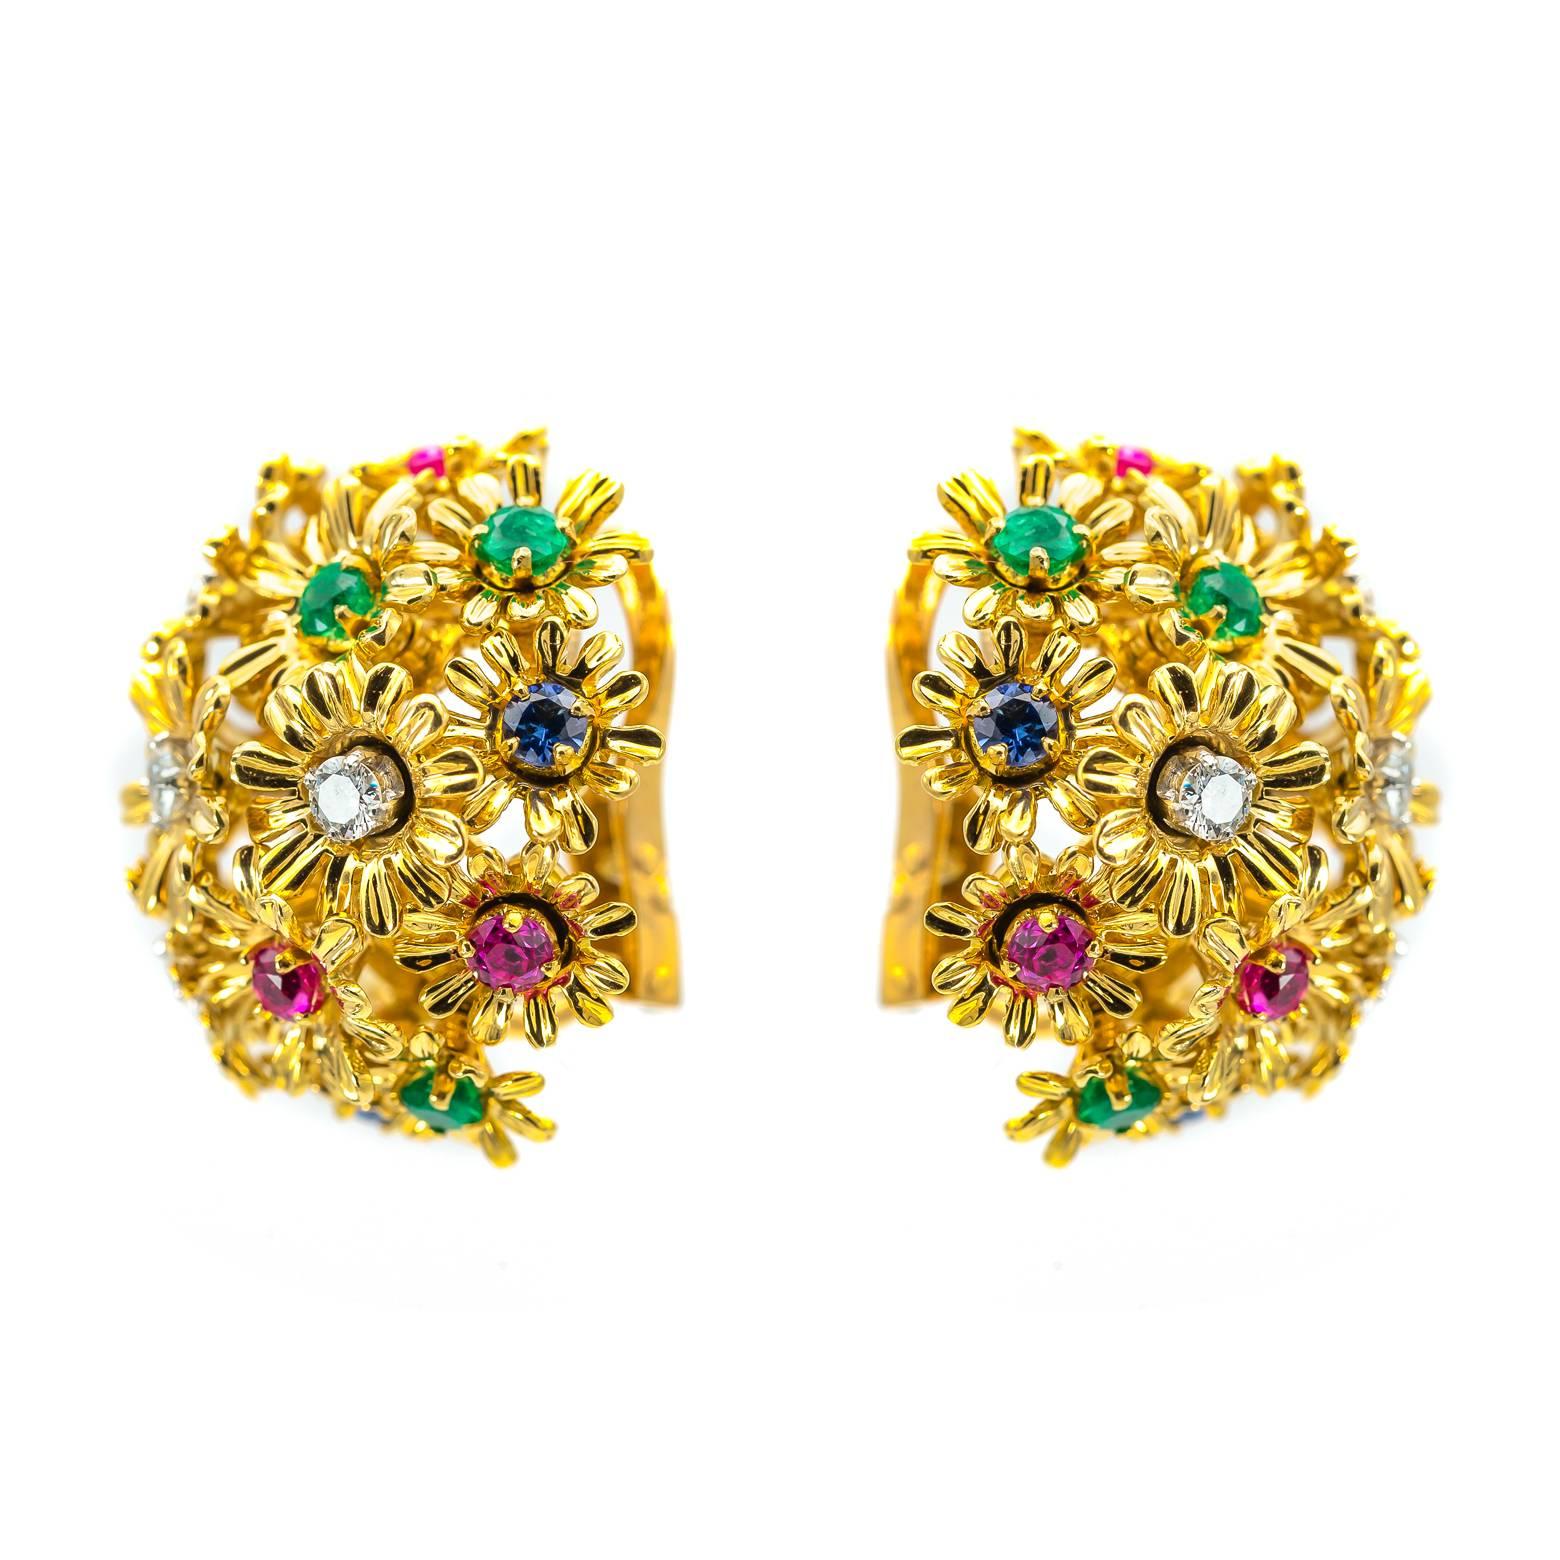 Round Cut Tremblant Yellow Gold Earrings Flower with Diamonds Rubies Emeralds Sapphire